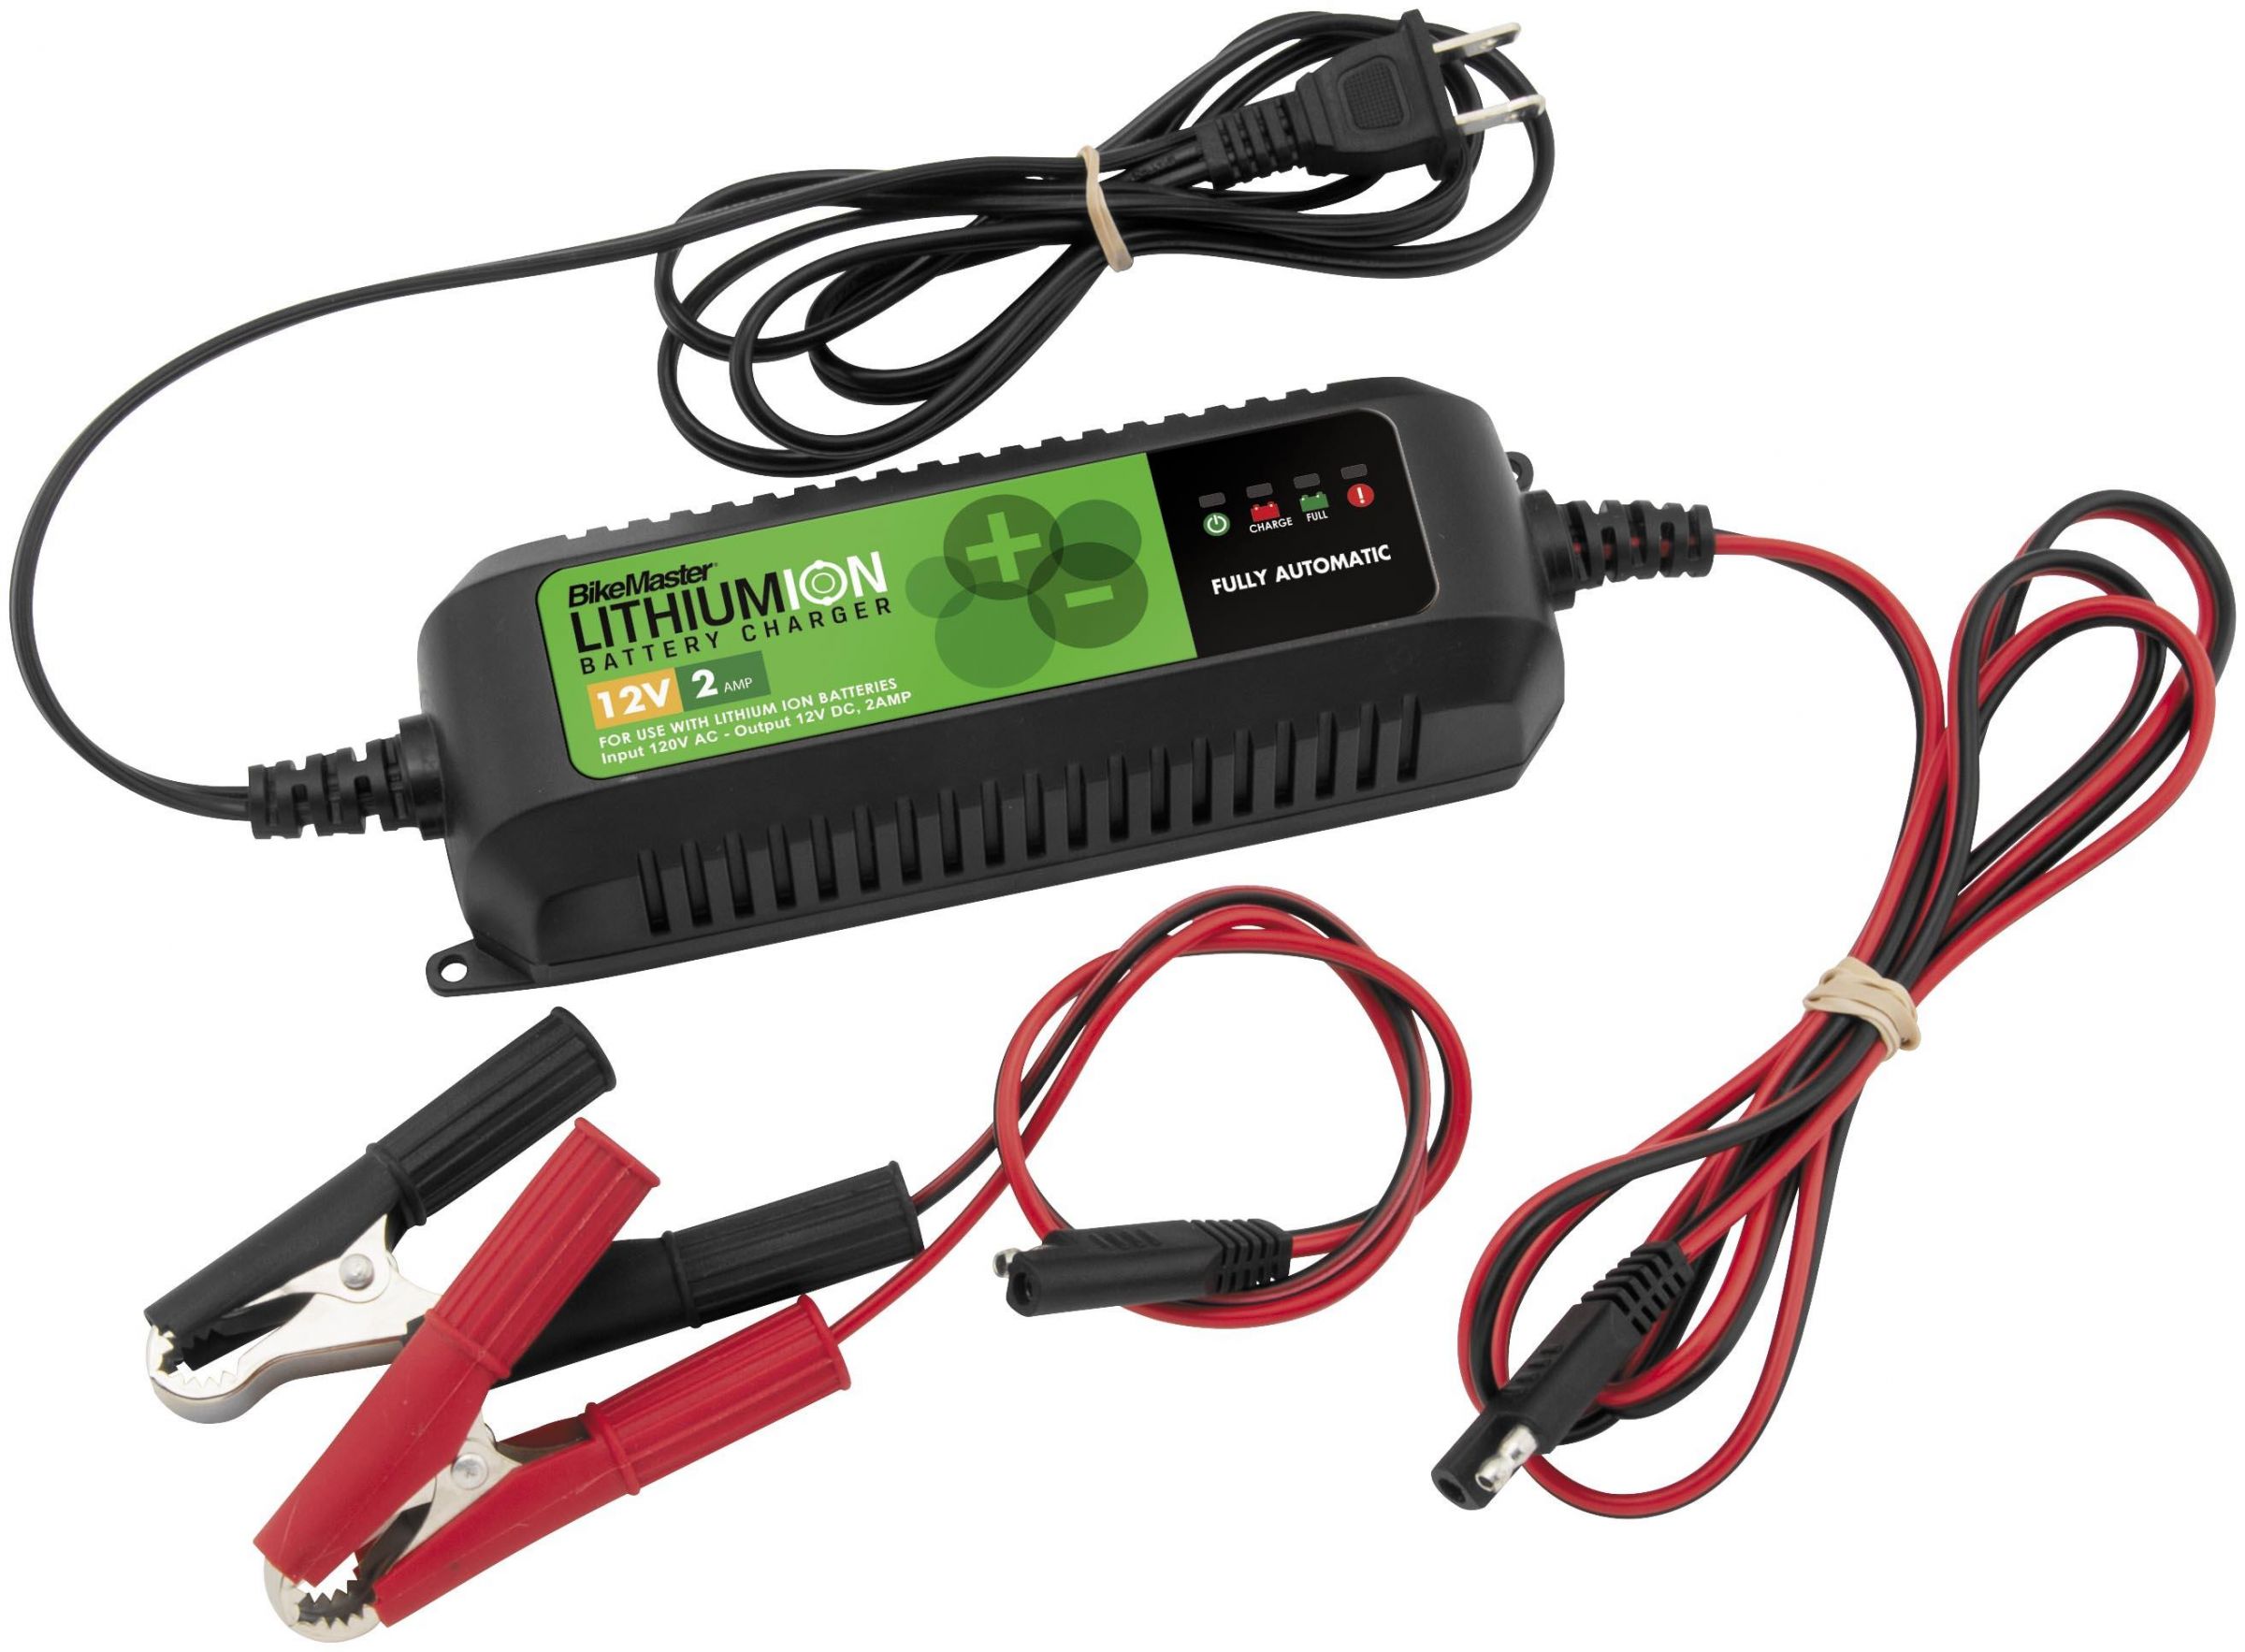 3W2N-BIKEMASTER-TS0207A Lithium Ion Battery Charger